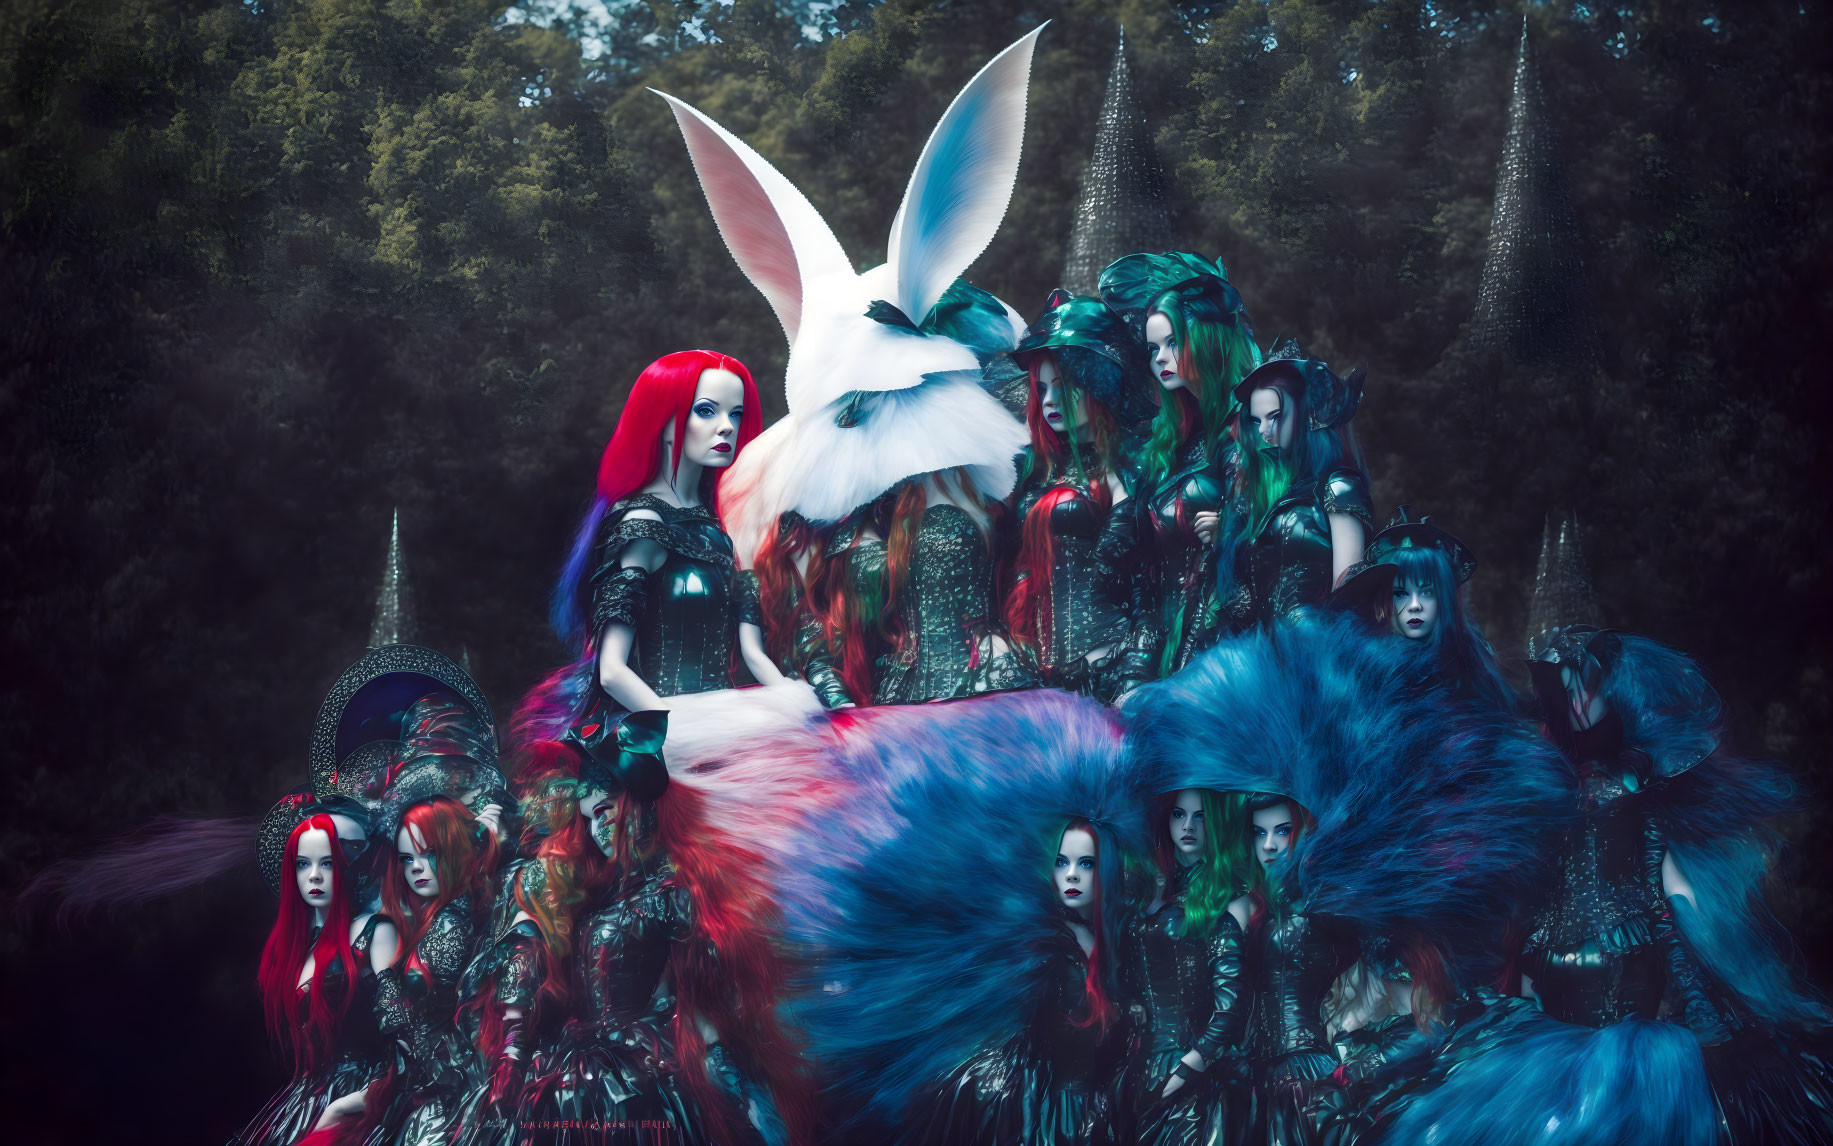 Individuals in elaborate fantasy costumes with vibrant hair in mystical forest setting